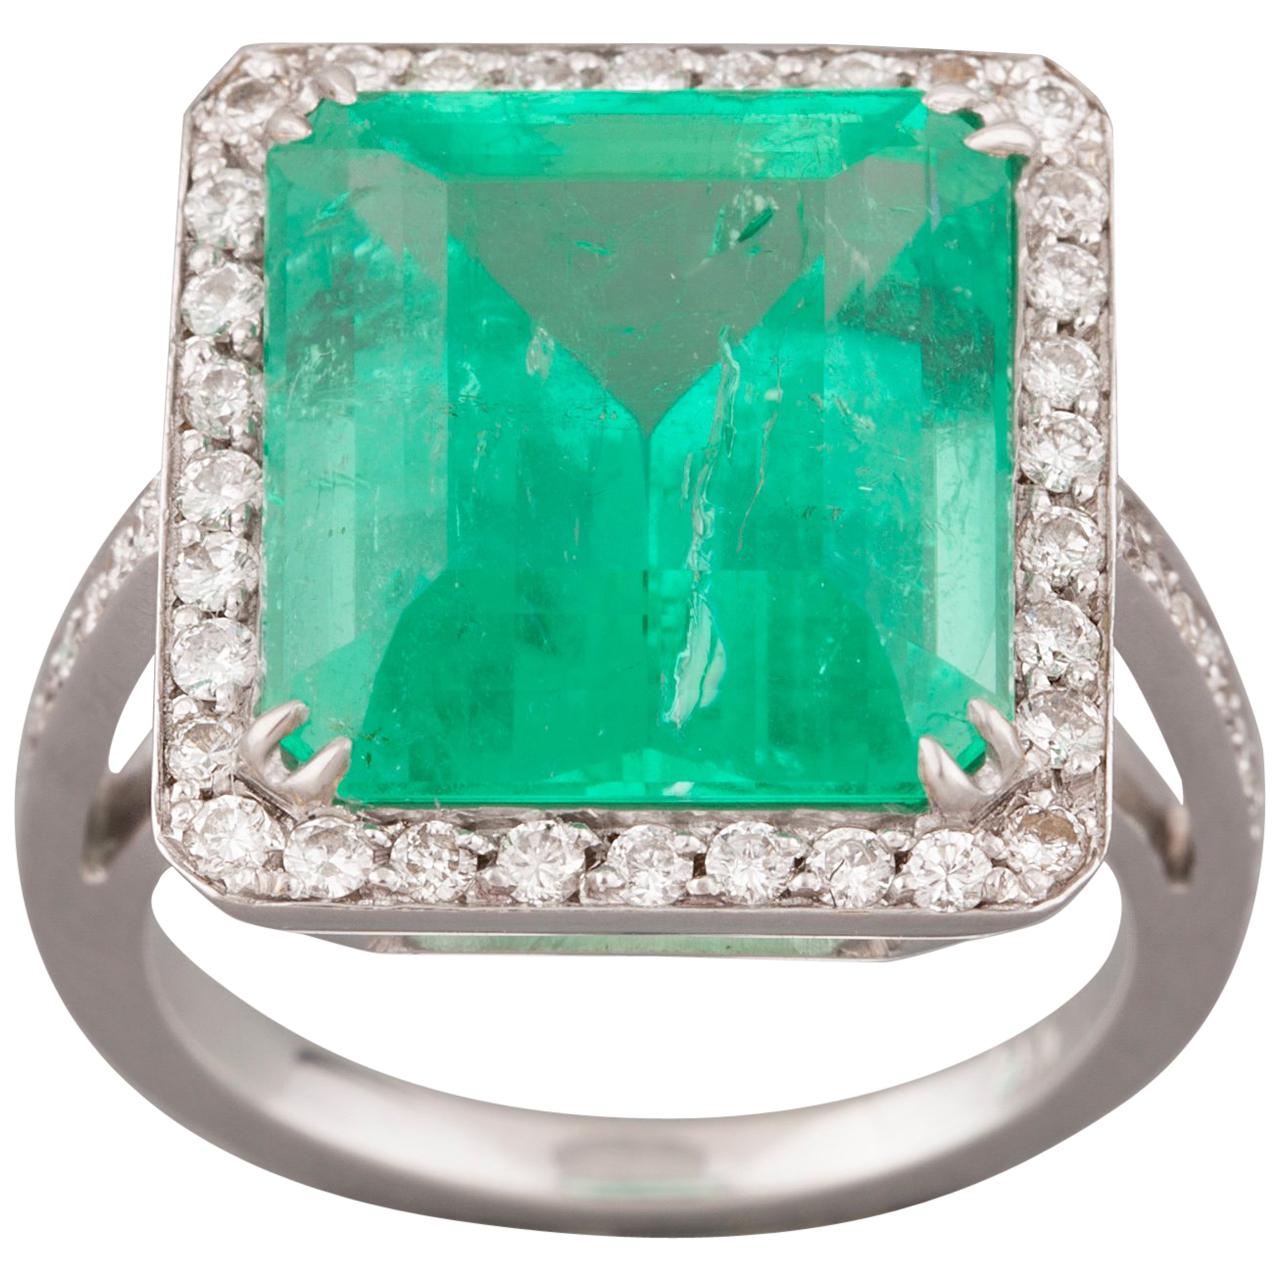 11.06 Carat French Emerald Ring